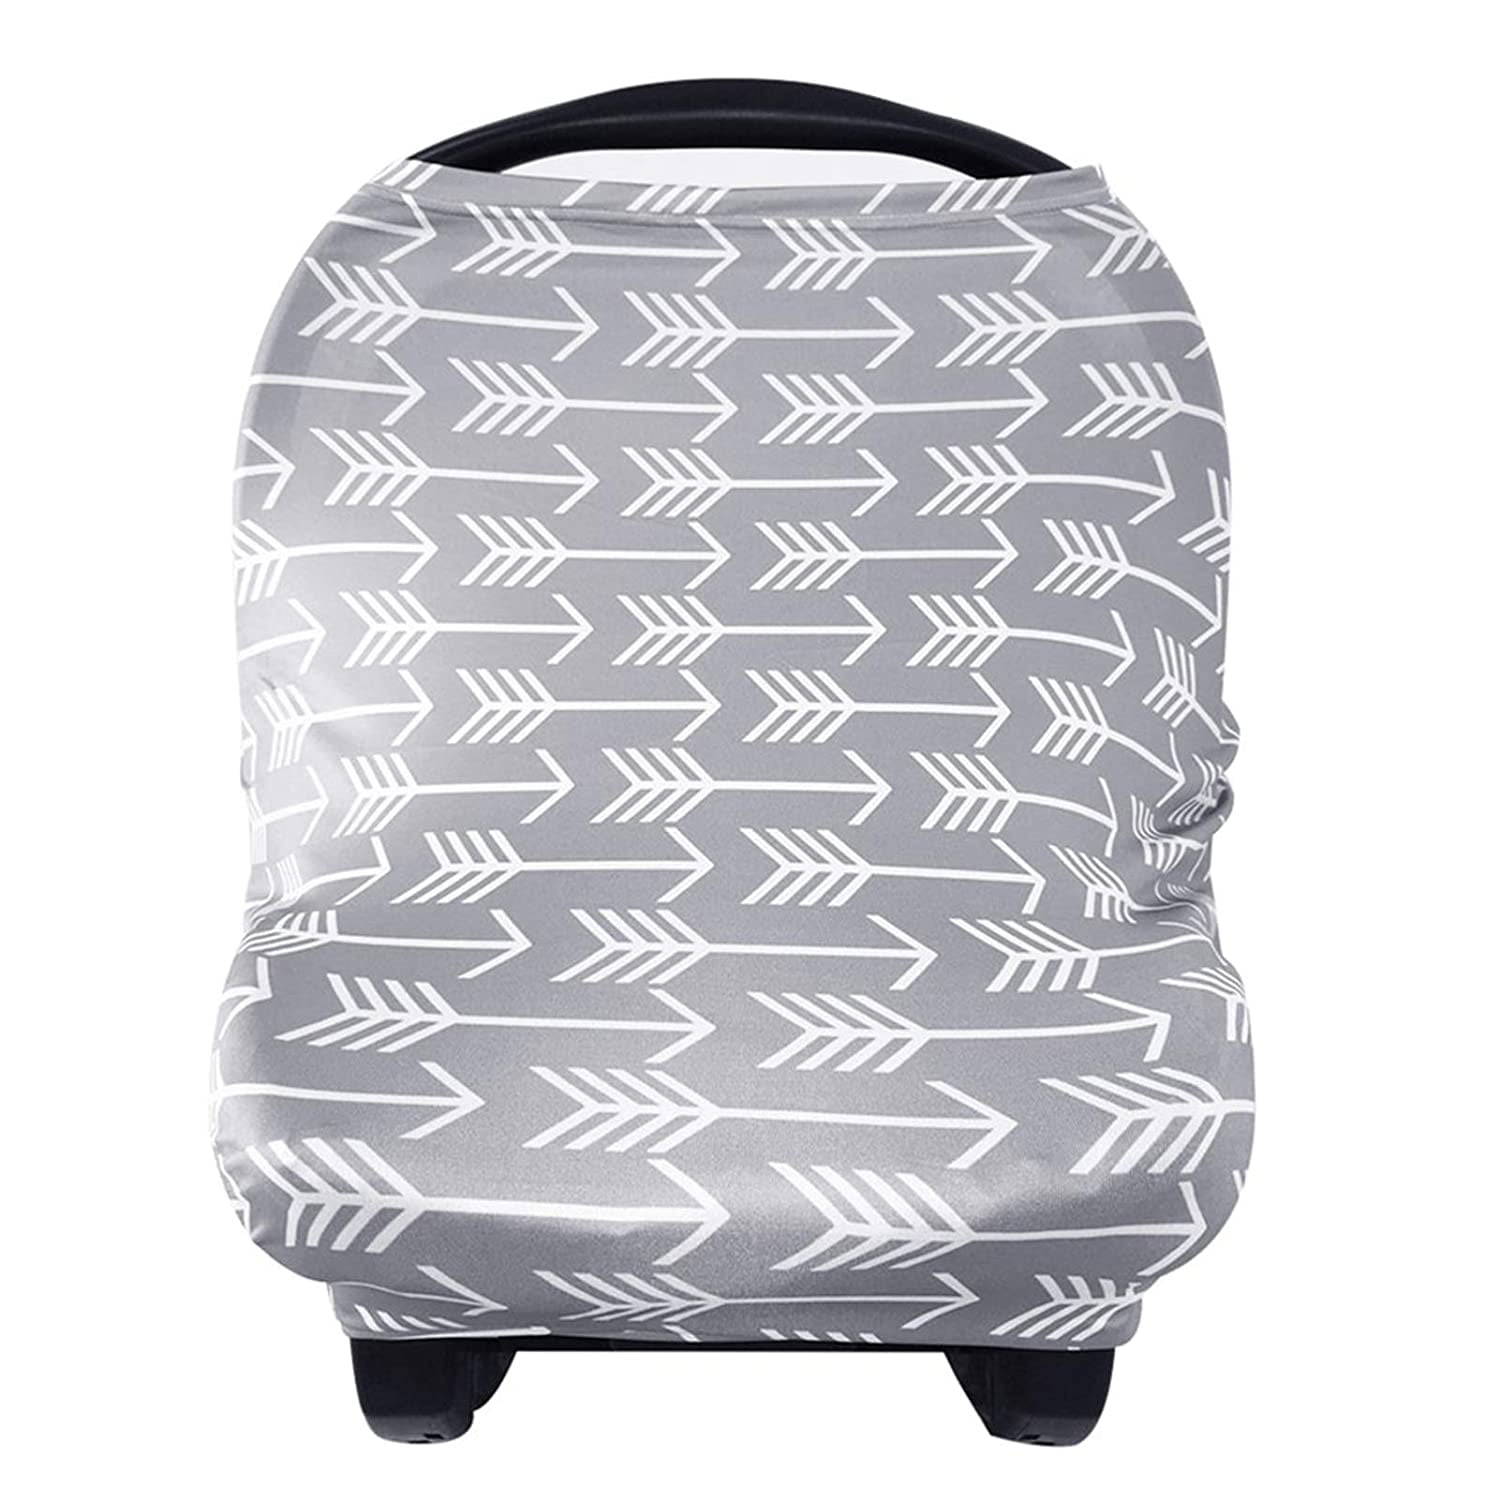 Multi-Use Stretchy Newborn Infant Nursing Cover Baby Car Seat Canopy Cart Cover 